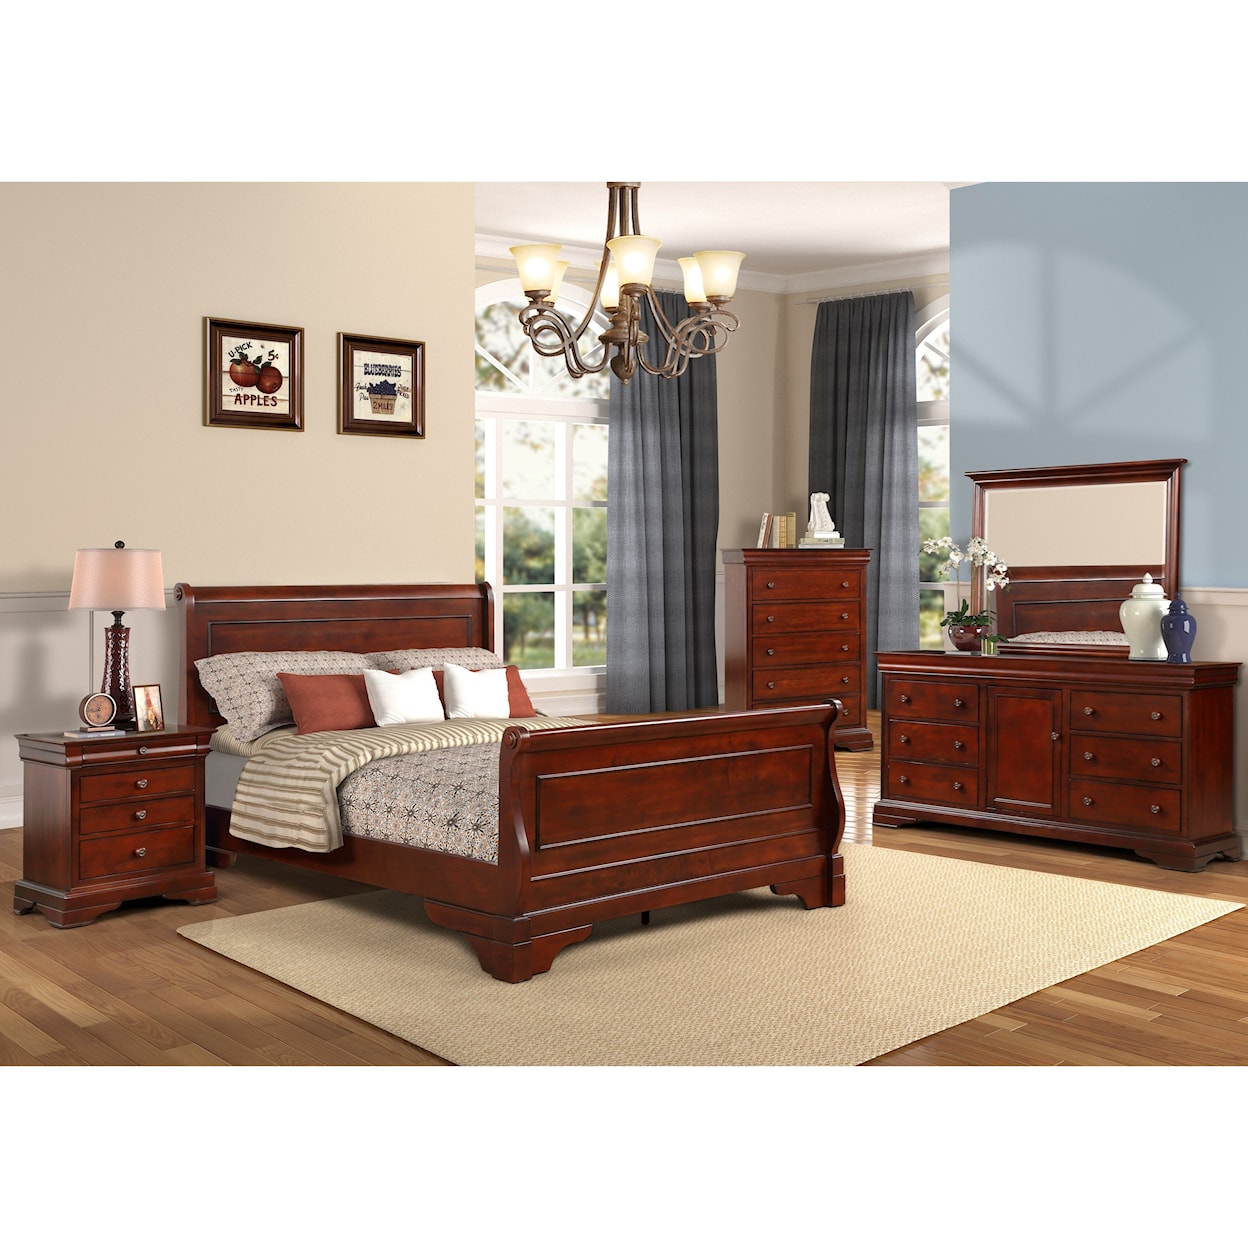 New Classic Versaille Full Bedroom Group